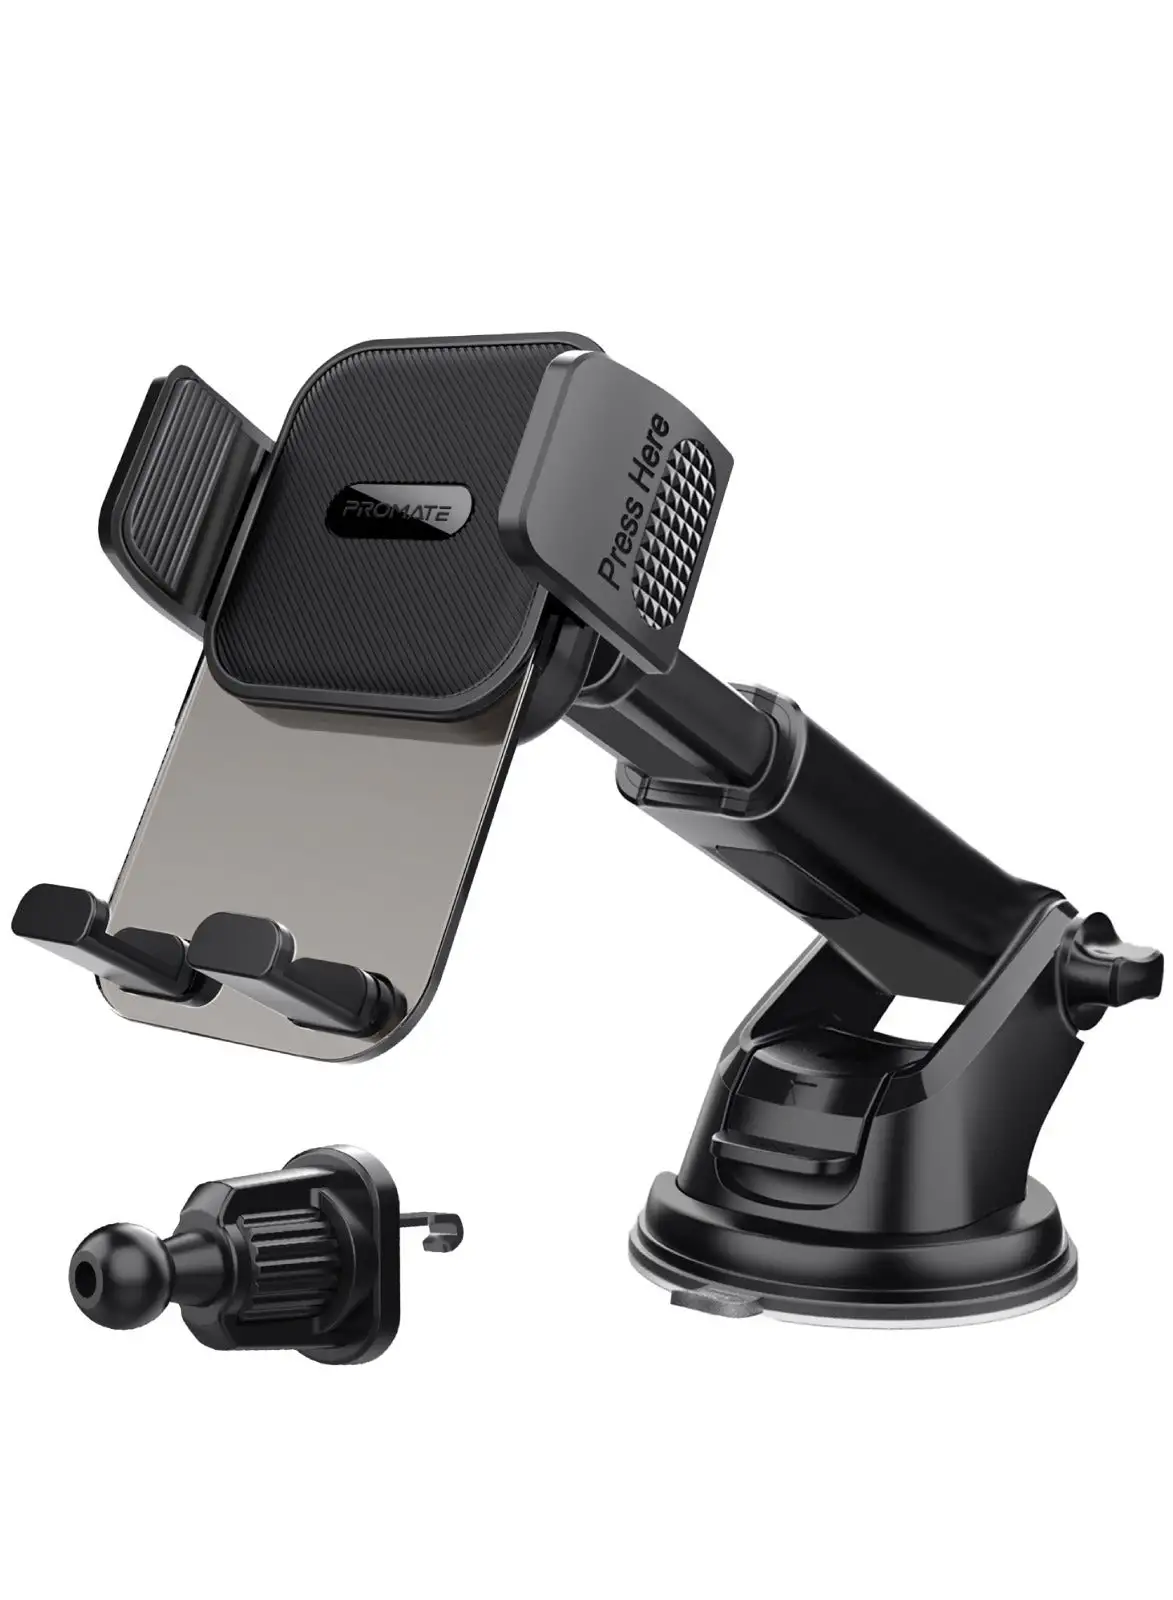 PROMATE Premium Transparent Car Mount with Intelligent Auto-Clamping Cradle Design, Versatile Mounting Options, Multi-Angle Support, Easy Installation Black